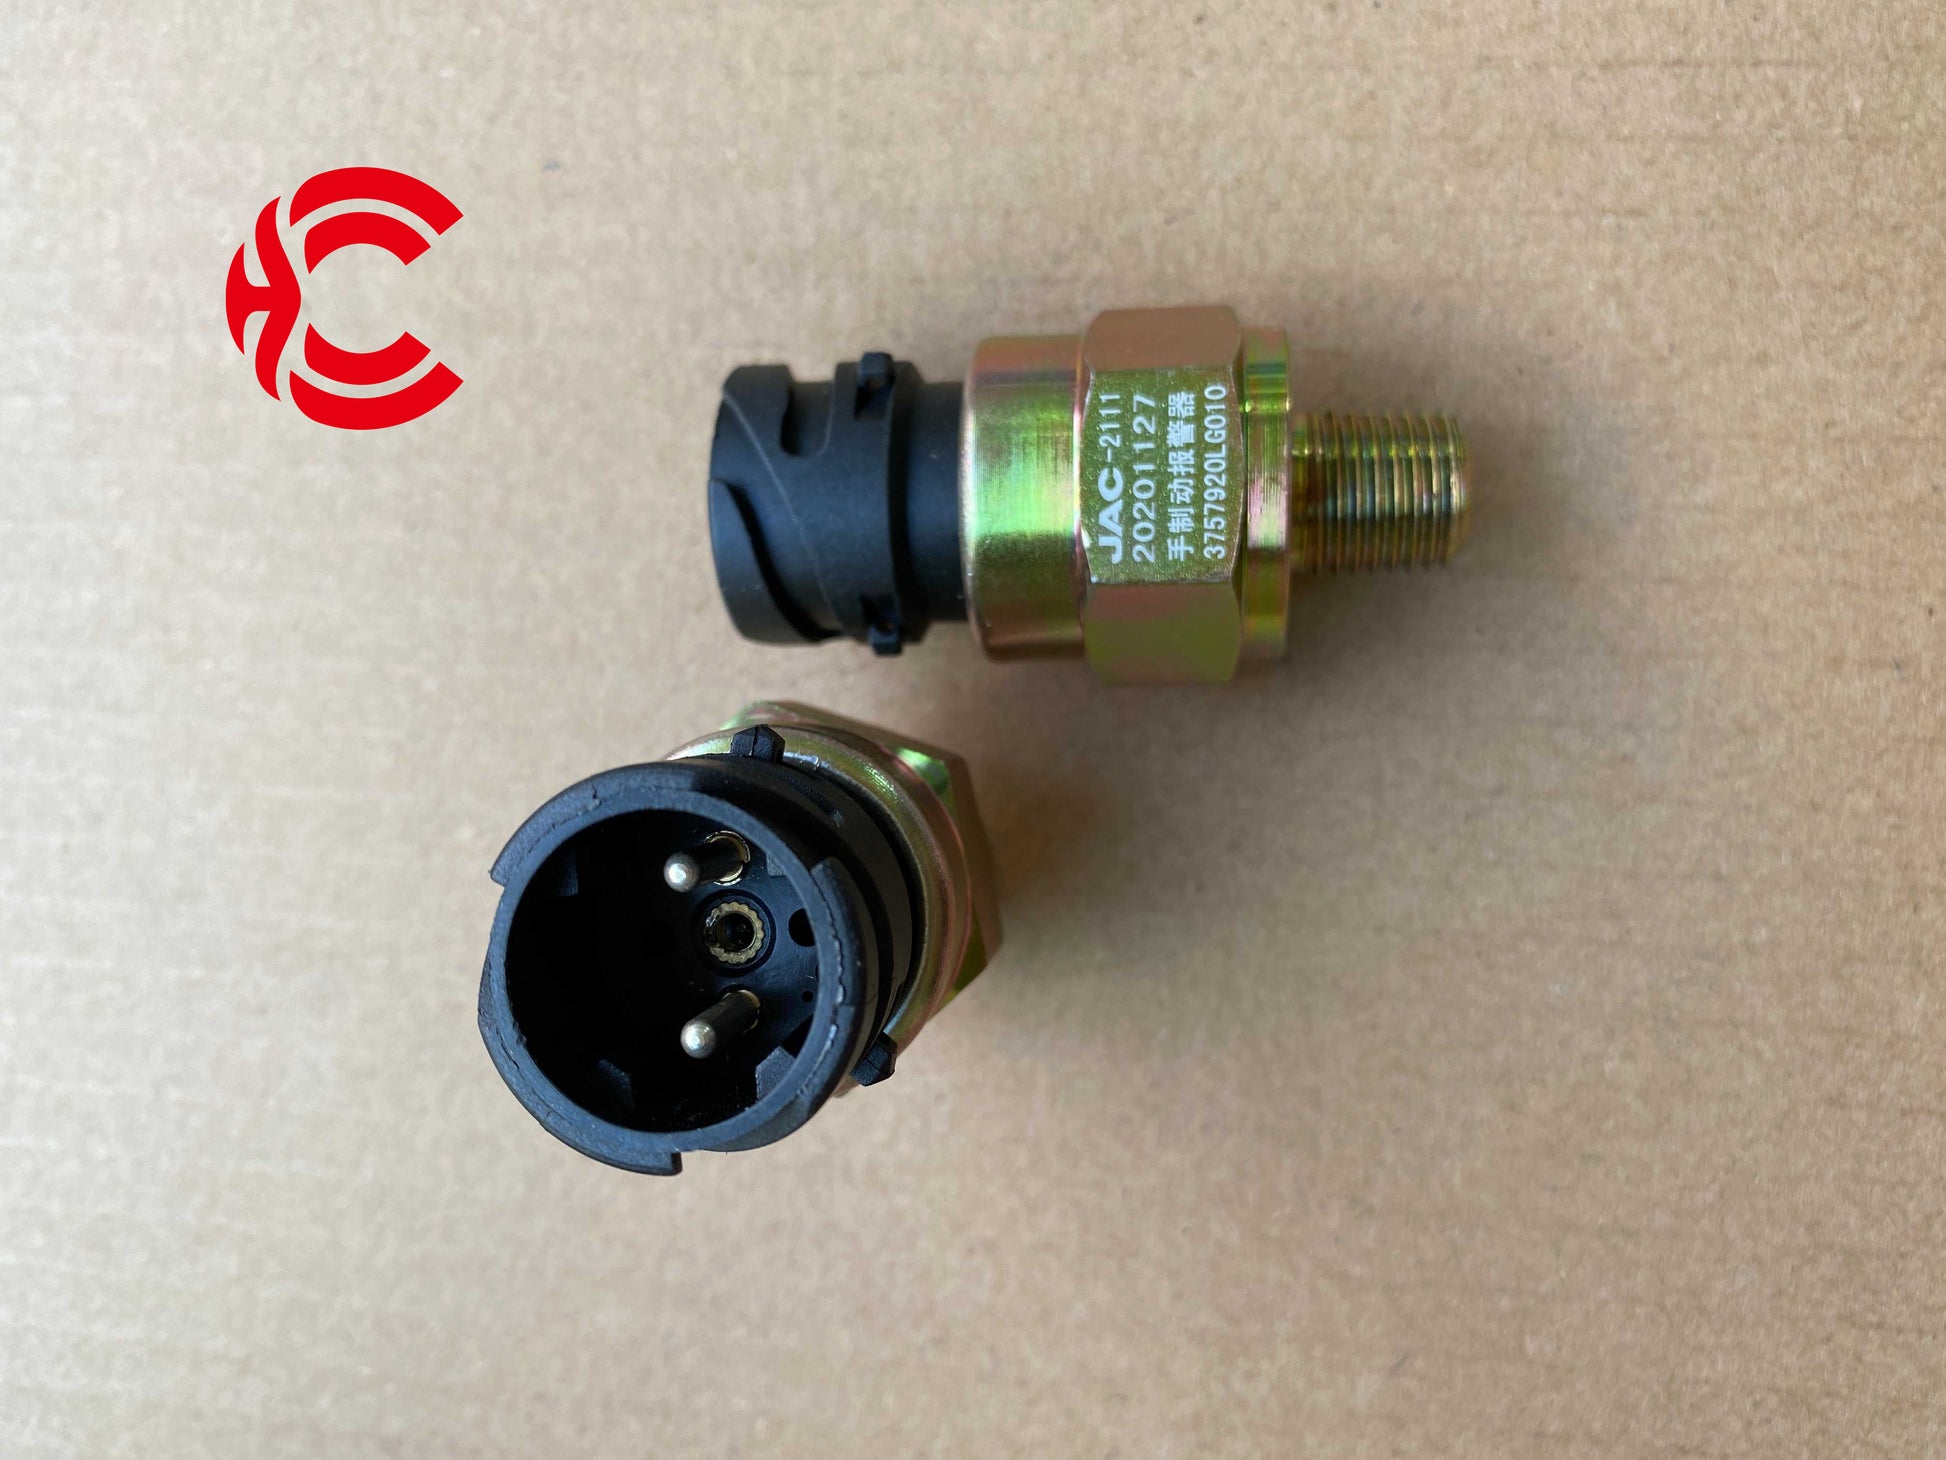 OEM: 3757920LG010Material: ABS metalColor: black silverOrigin: Made in ChinaWeight: 100gPacking List: 1* Brake Light Switch More ServiceWe can provide OEM Manufacturing serviceWe can Be your one-step solution for Auto PartsWe can provide technical scheme for you Feel Free to Contact Us, We will get back to you as soon as possible.